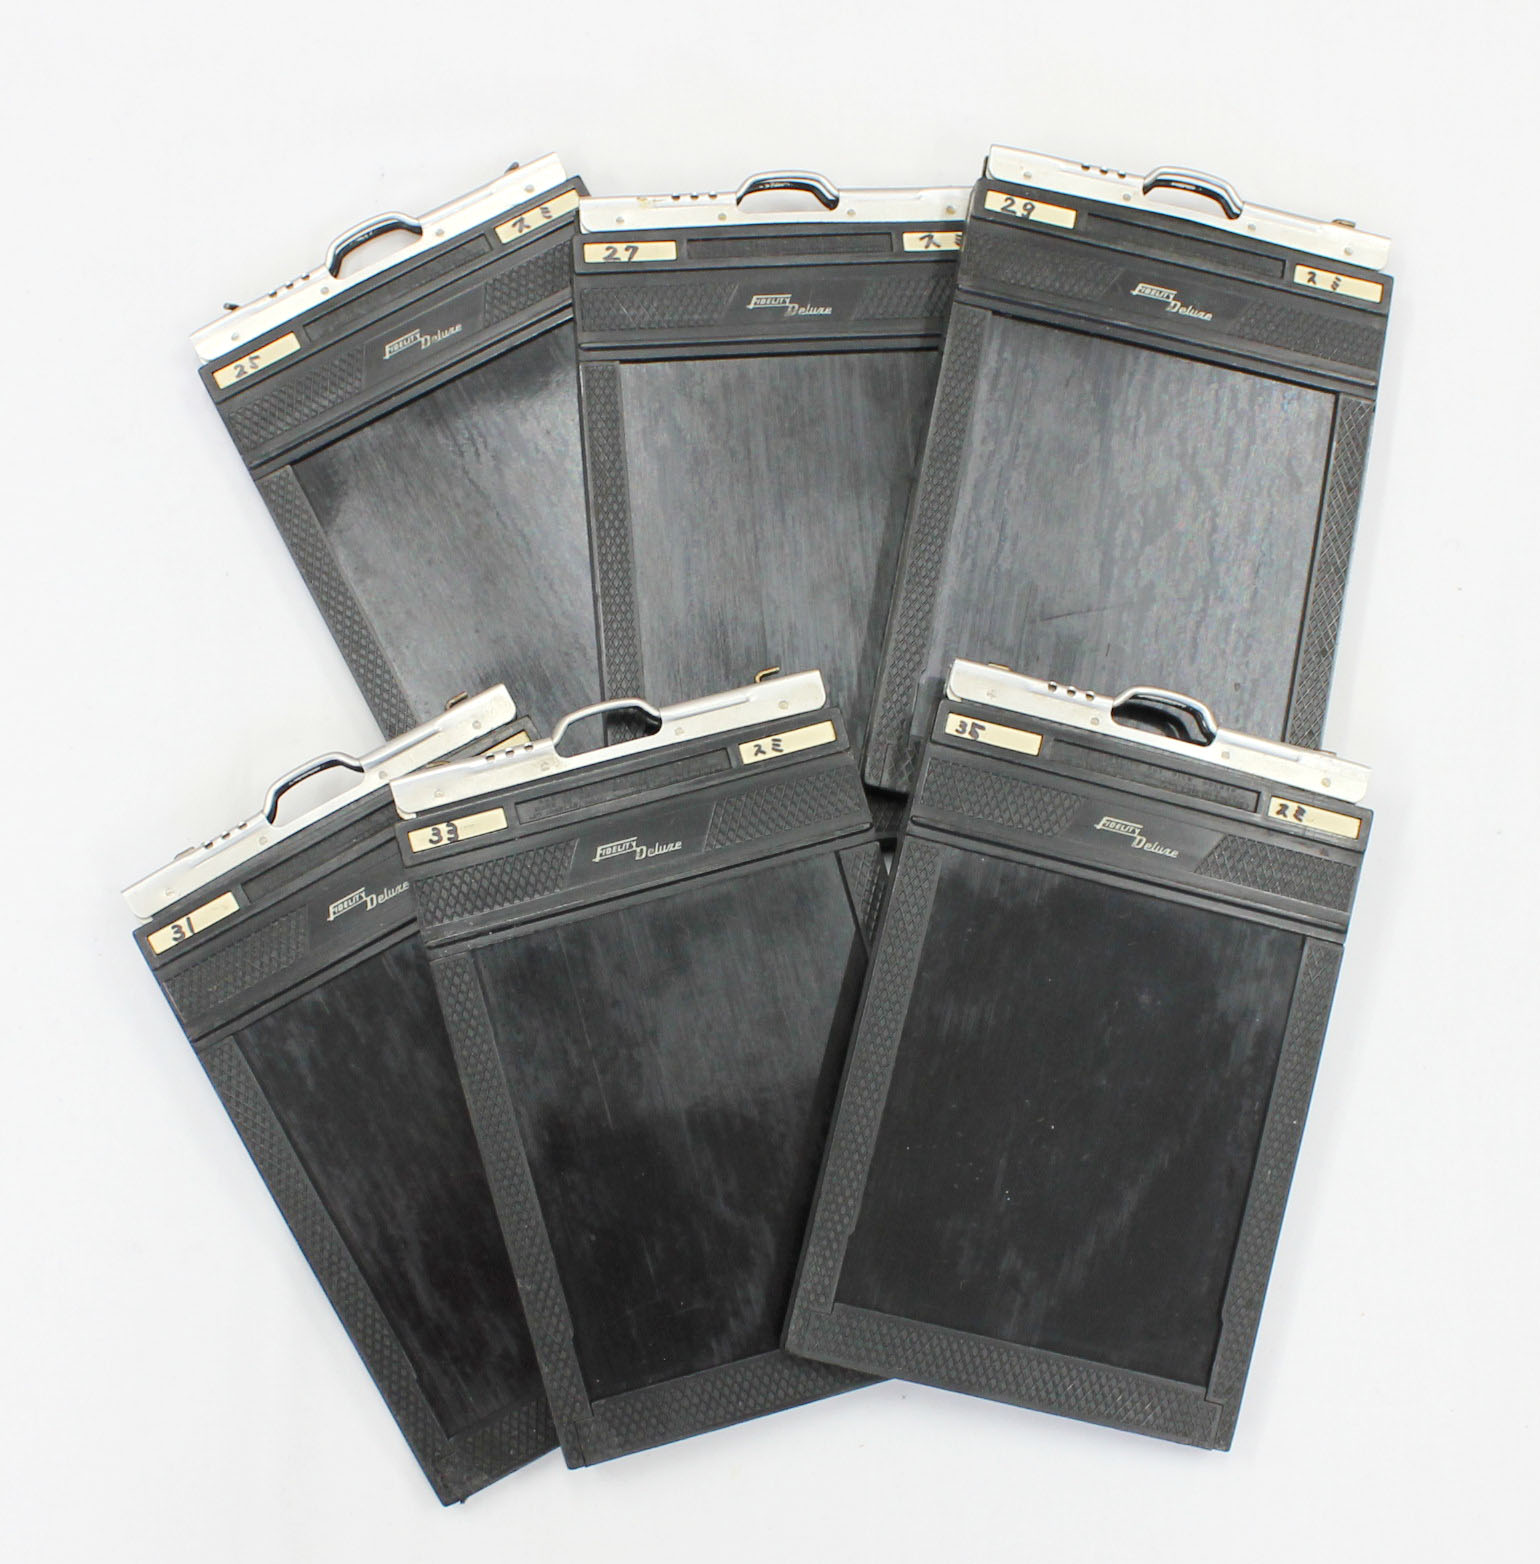 Japan Used Camera Shop | Fidelity Deluxe 4x5 Cut Sheet Film Holder Lot of 6 from Japan